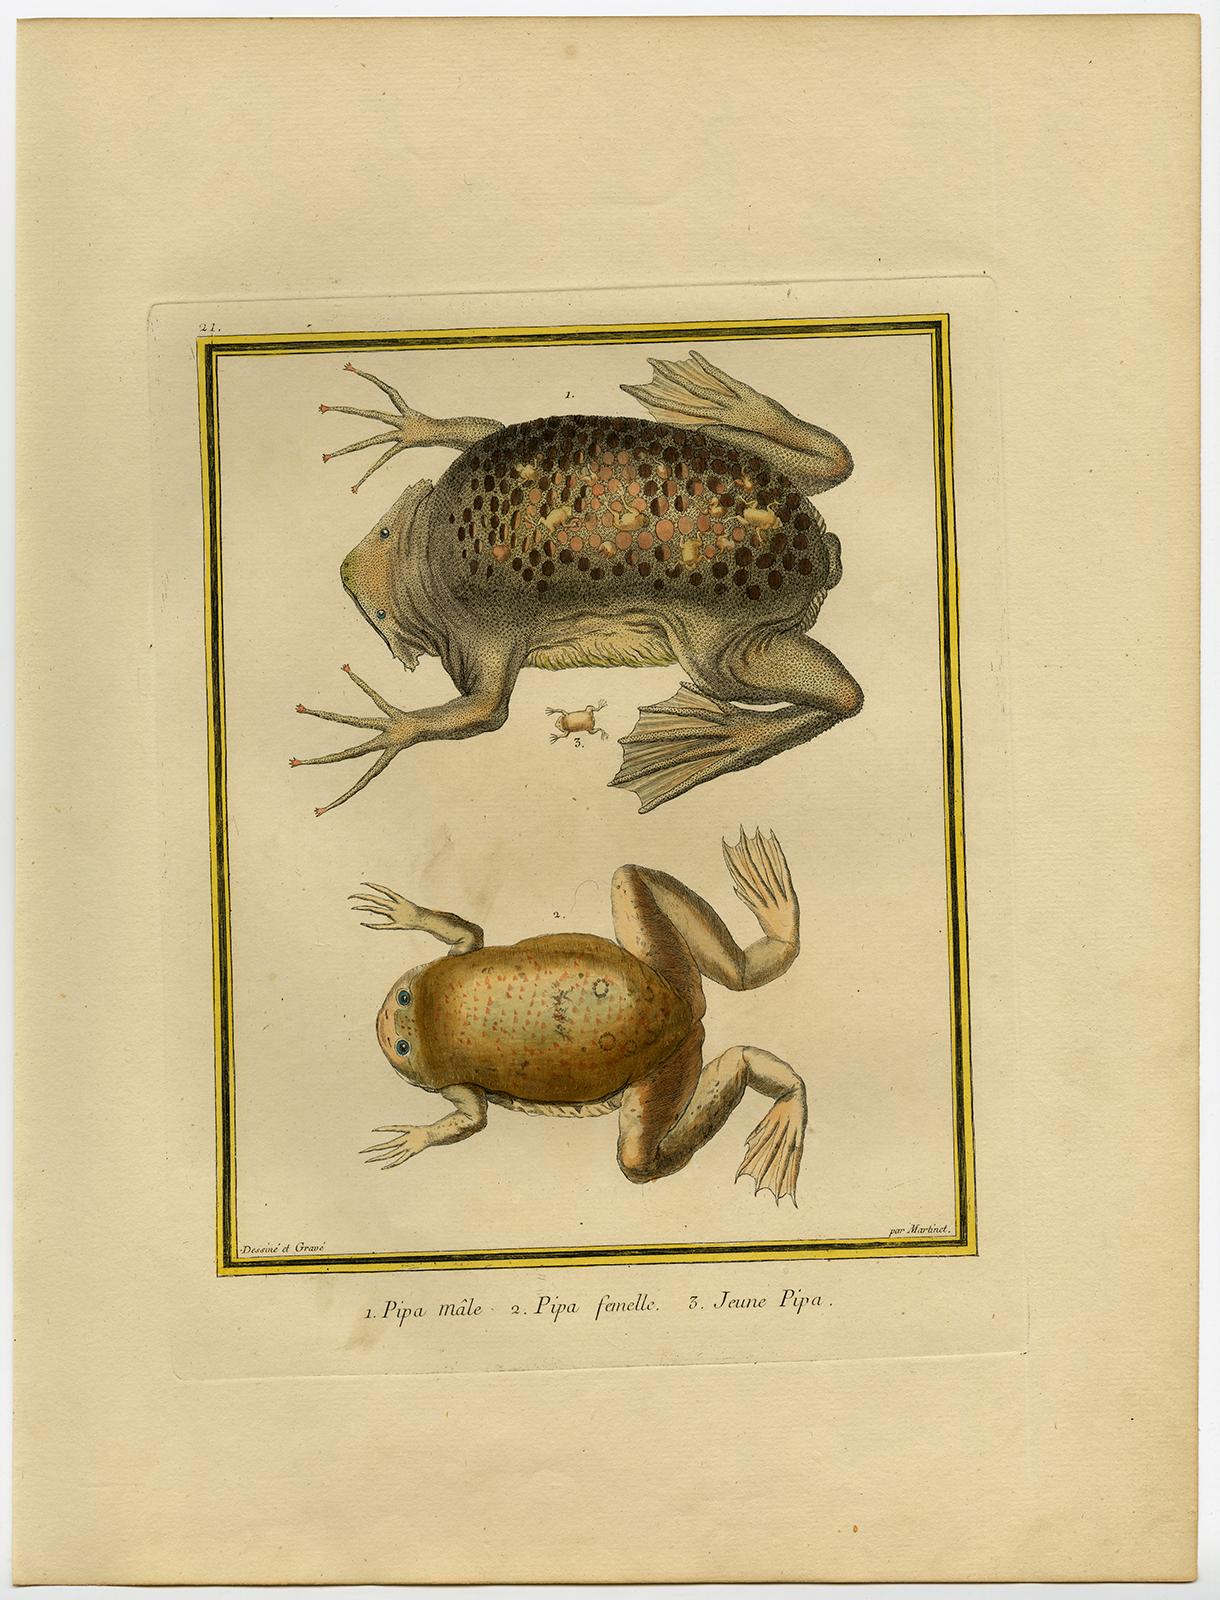 Suriname Toad male, female and young by Martinet - Handcol. engraving - 18th c. - Print by Francois Nicolas Martinet